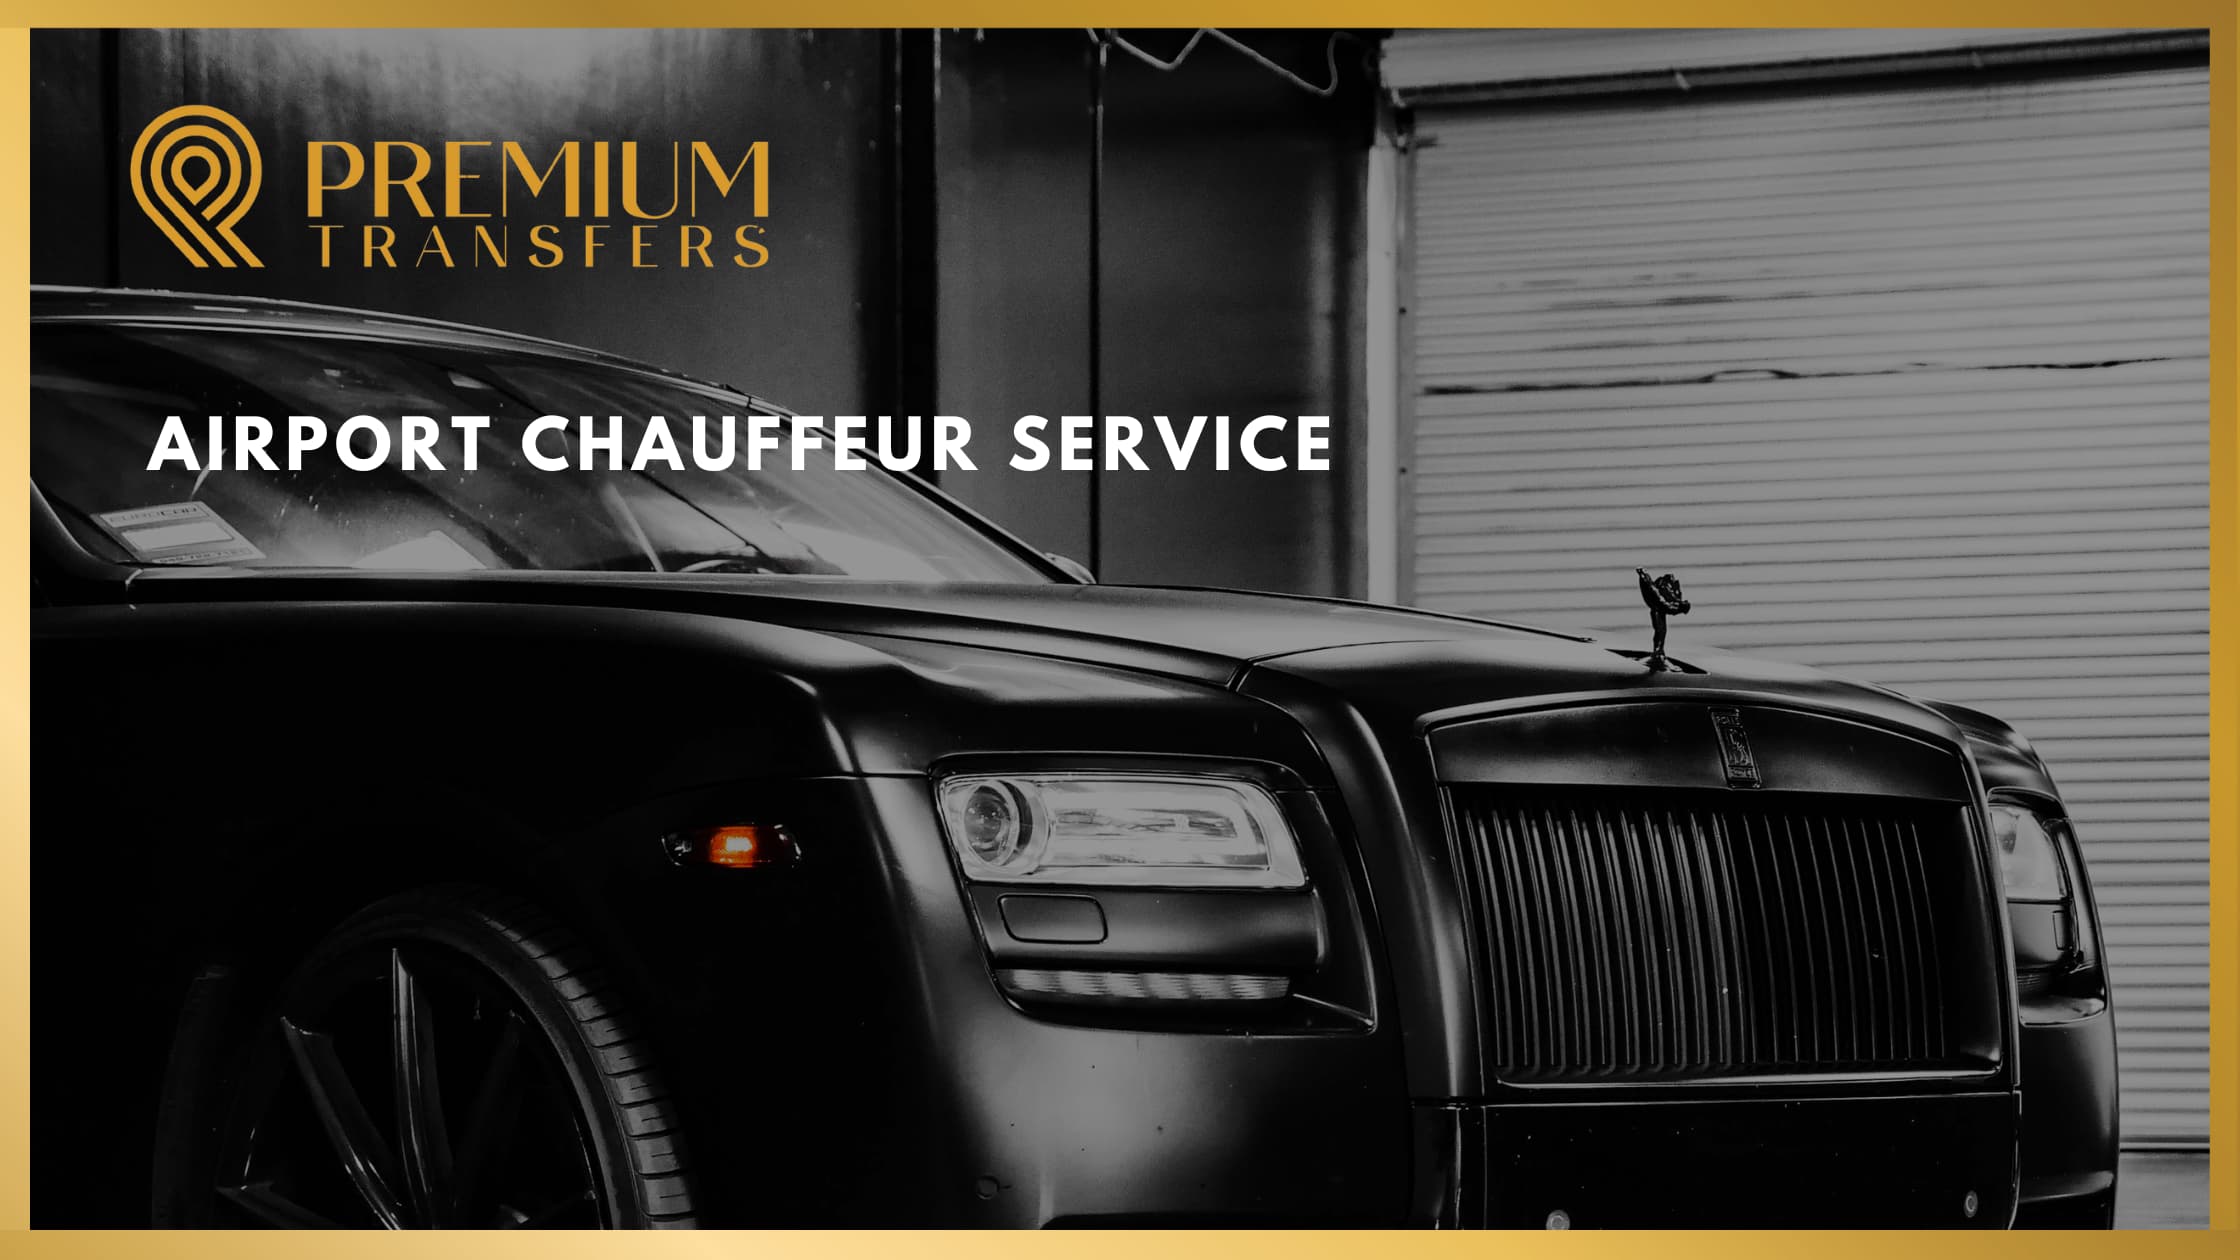 Easy Navigation of London: The Details of Airport Chauffeur Service